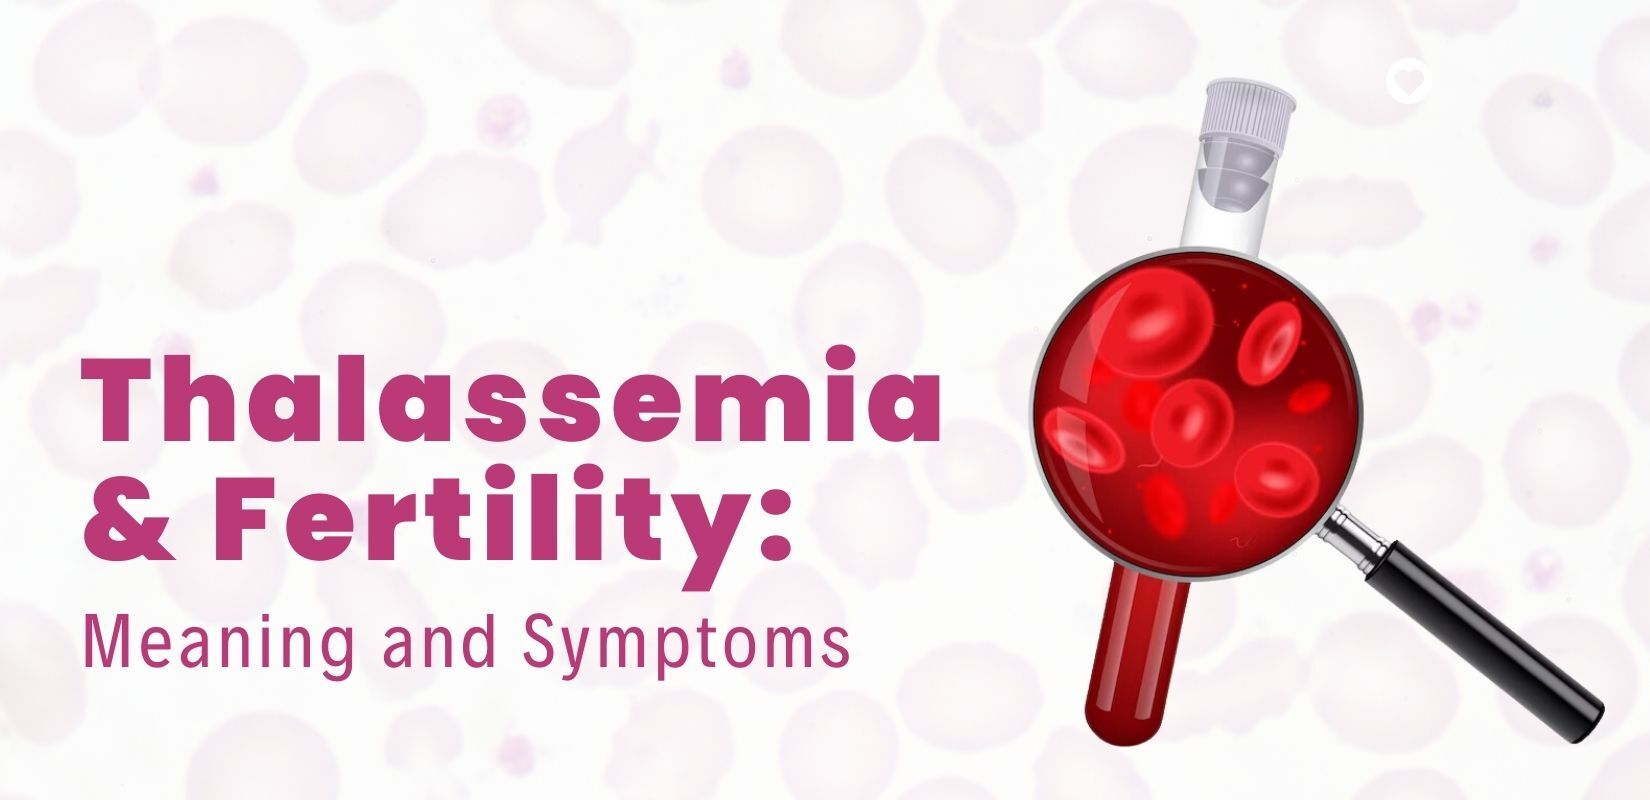 Thalassemia & Fertility: Meaning and Symptoms